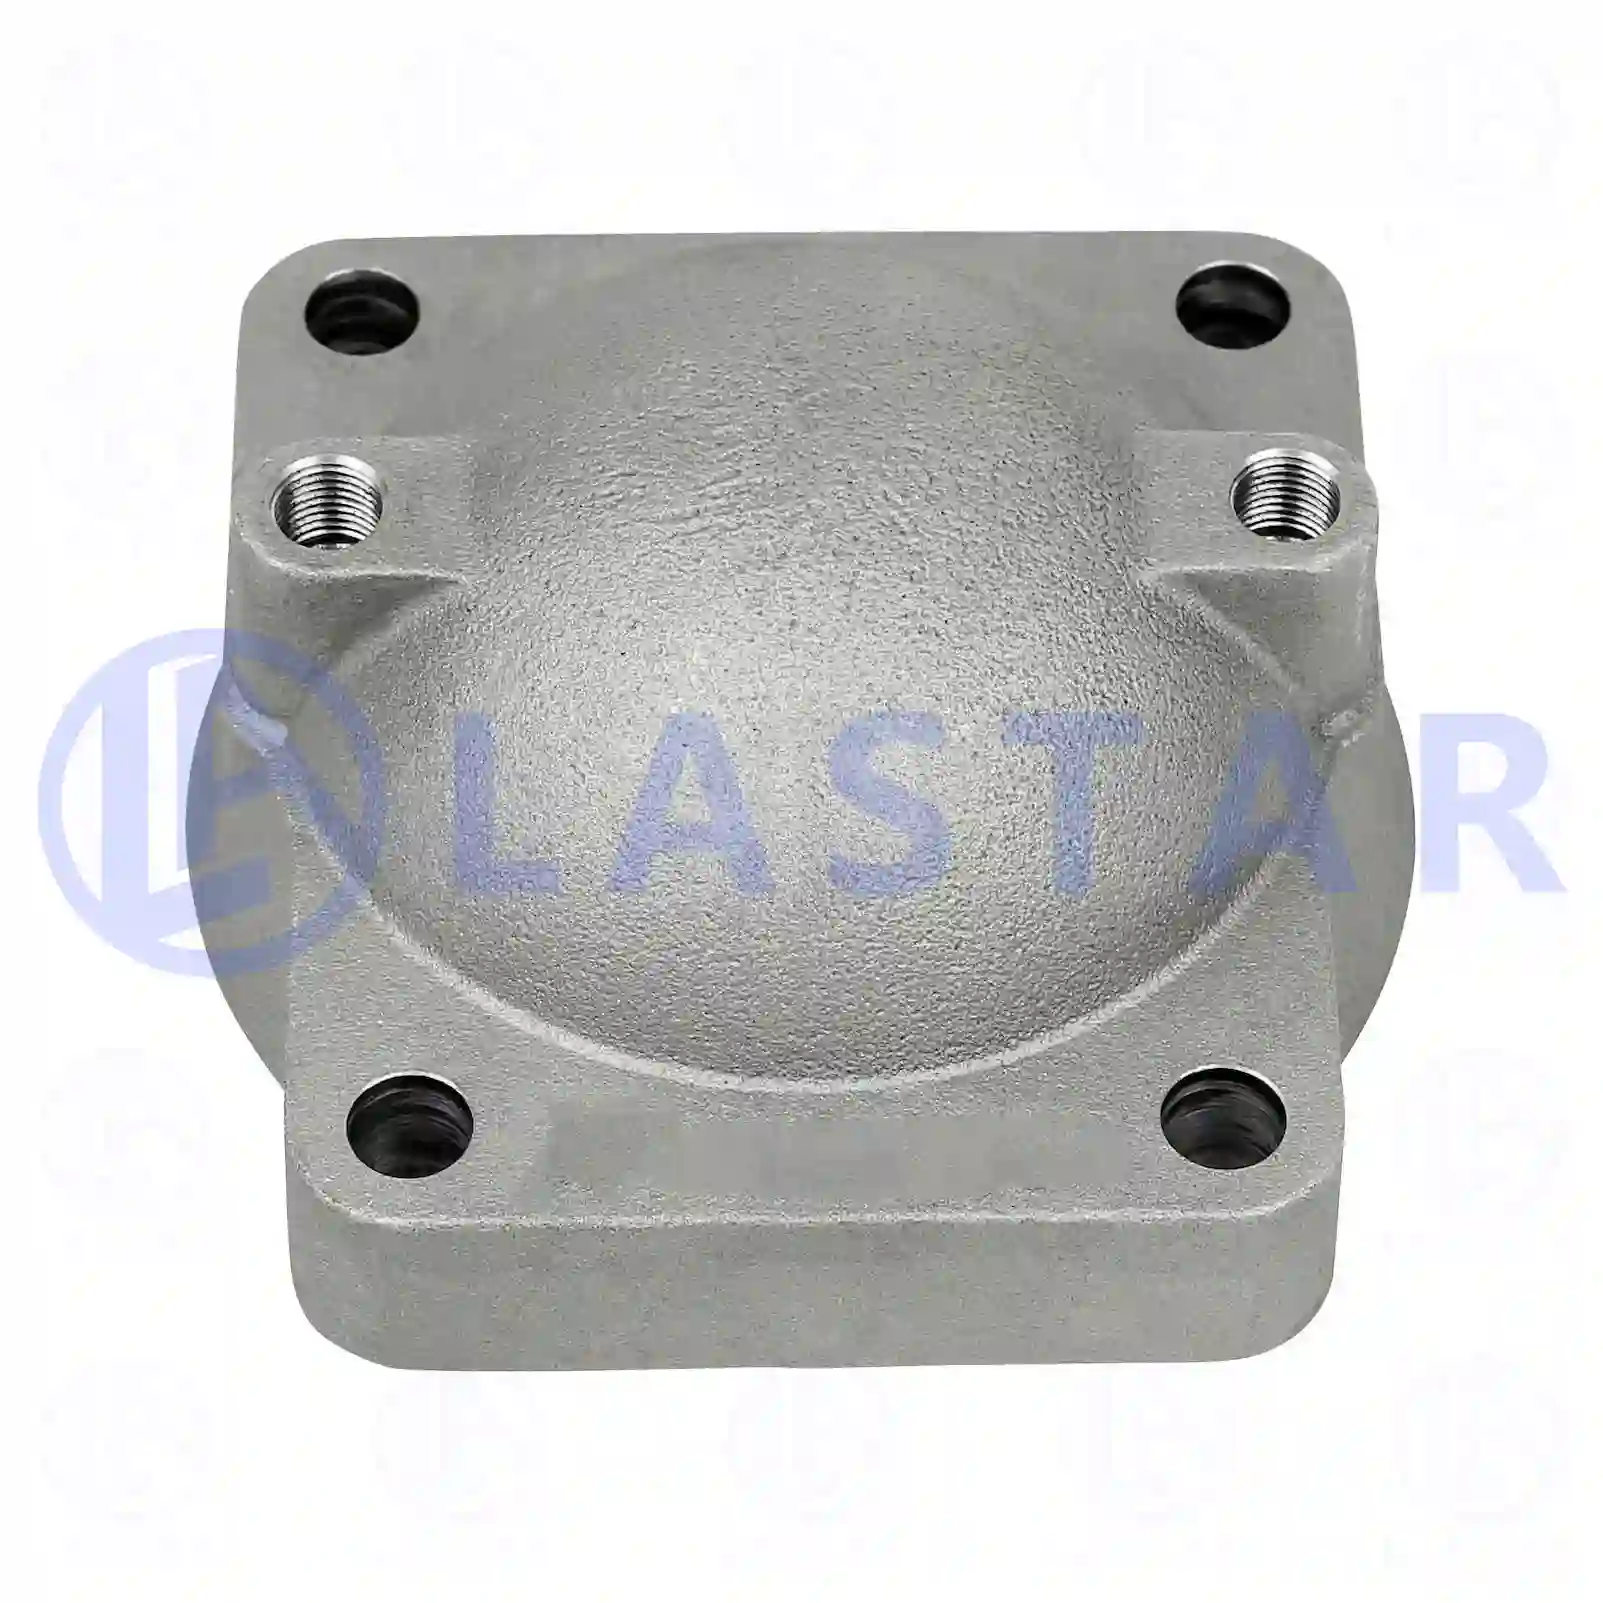 Cover, steering knuckle, 77730546, 1580270, 3963533, ZG30015-0008 ||  77730546 Lastar Spare Part | Truck Spare Parts, Auotomotive Spare Parts Cover, steering knuckle, 77730546, 1580270, 3963533, ZG30015-0008 ||  77730546 Lastar Spare Part | Truck Spare Parts, Auotomotive Spare Parts